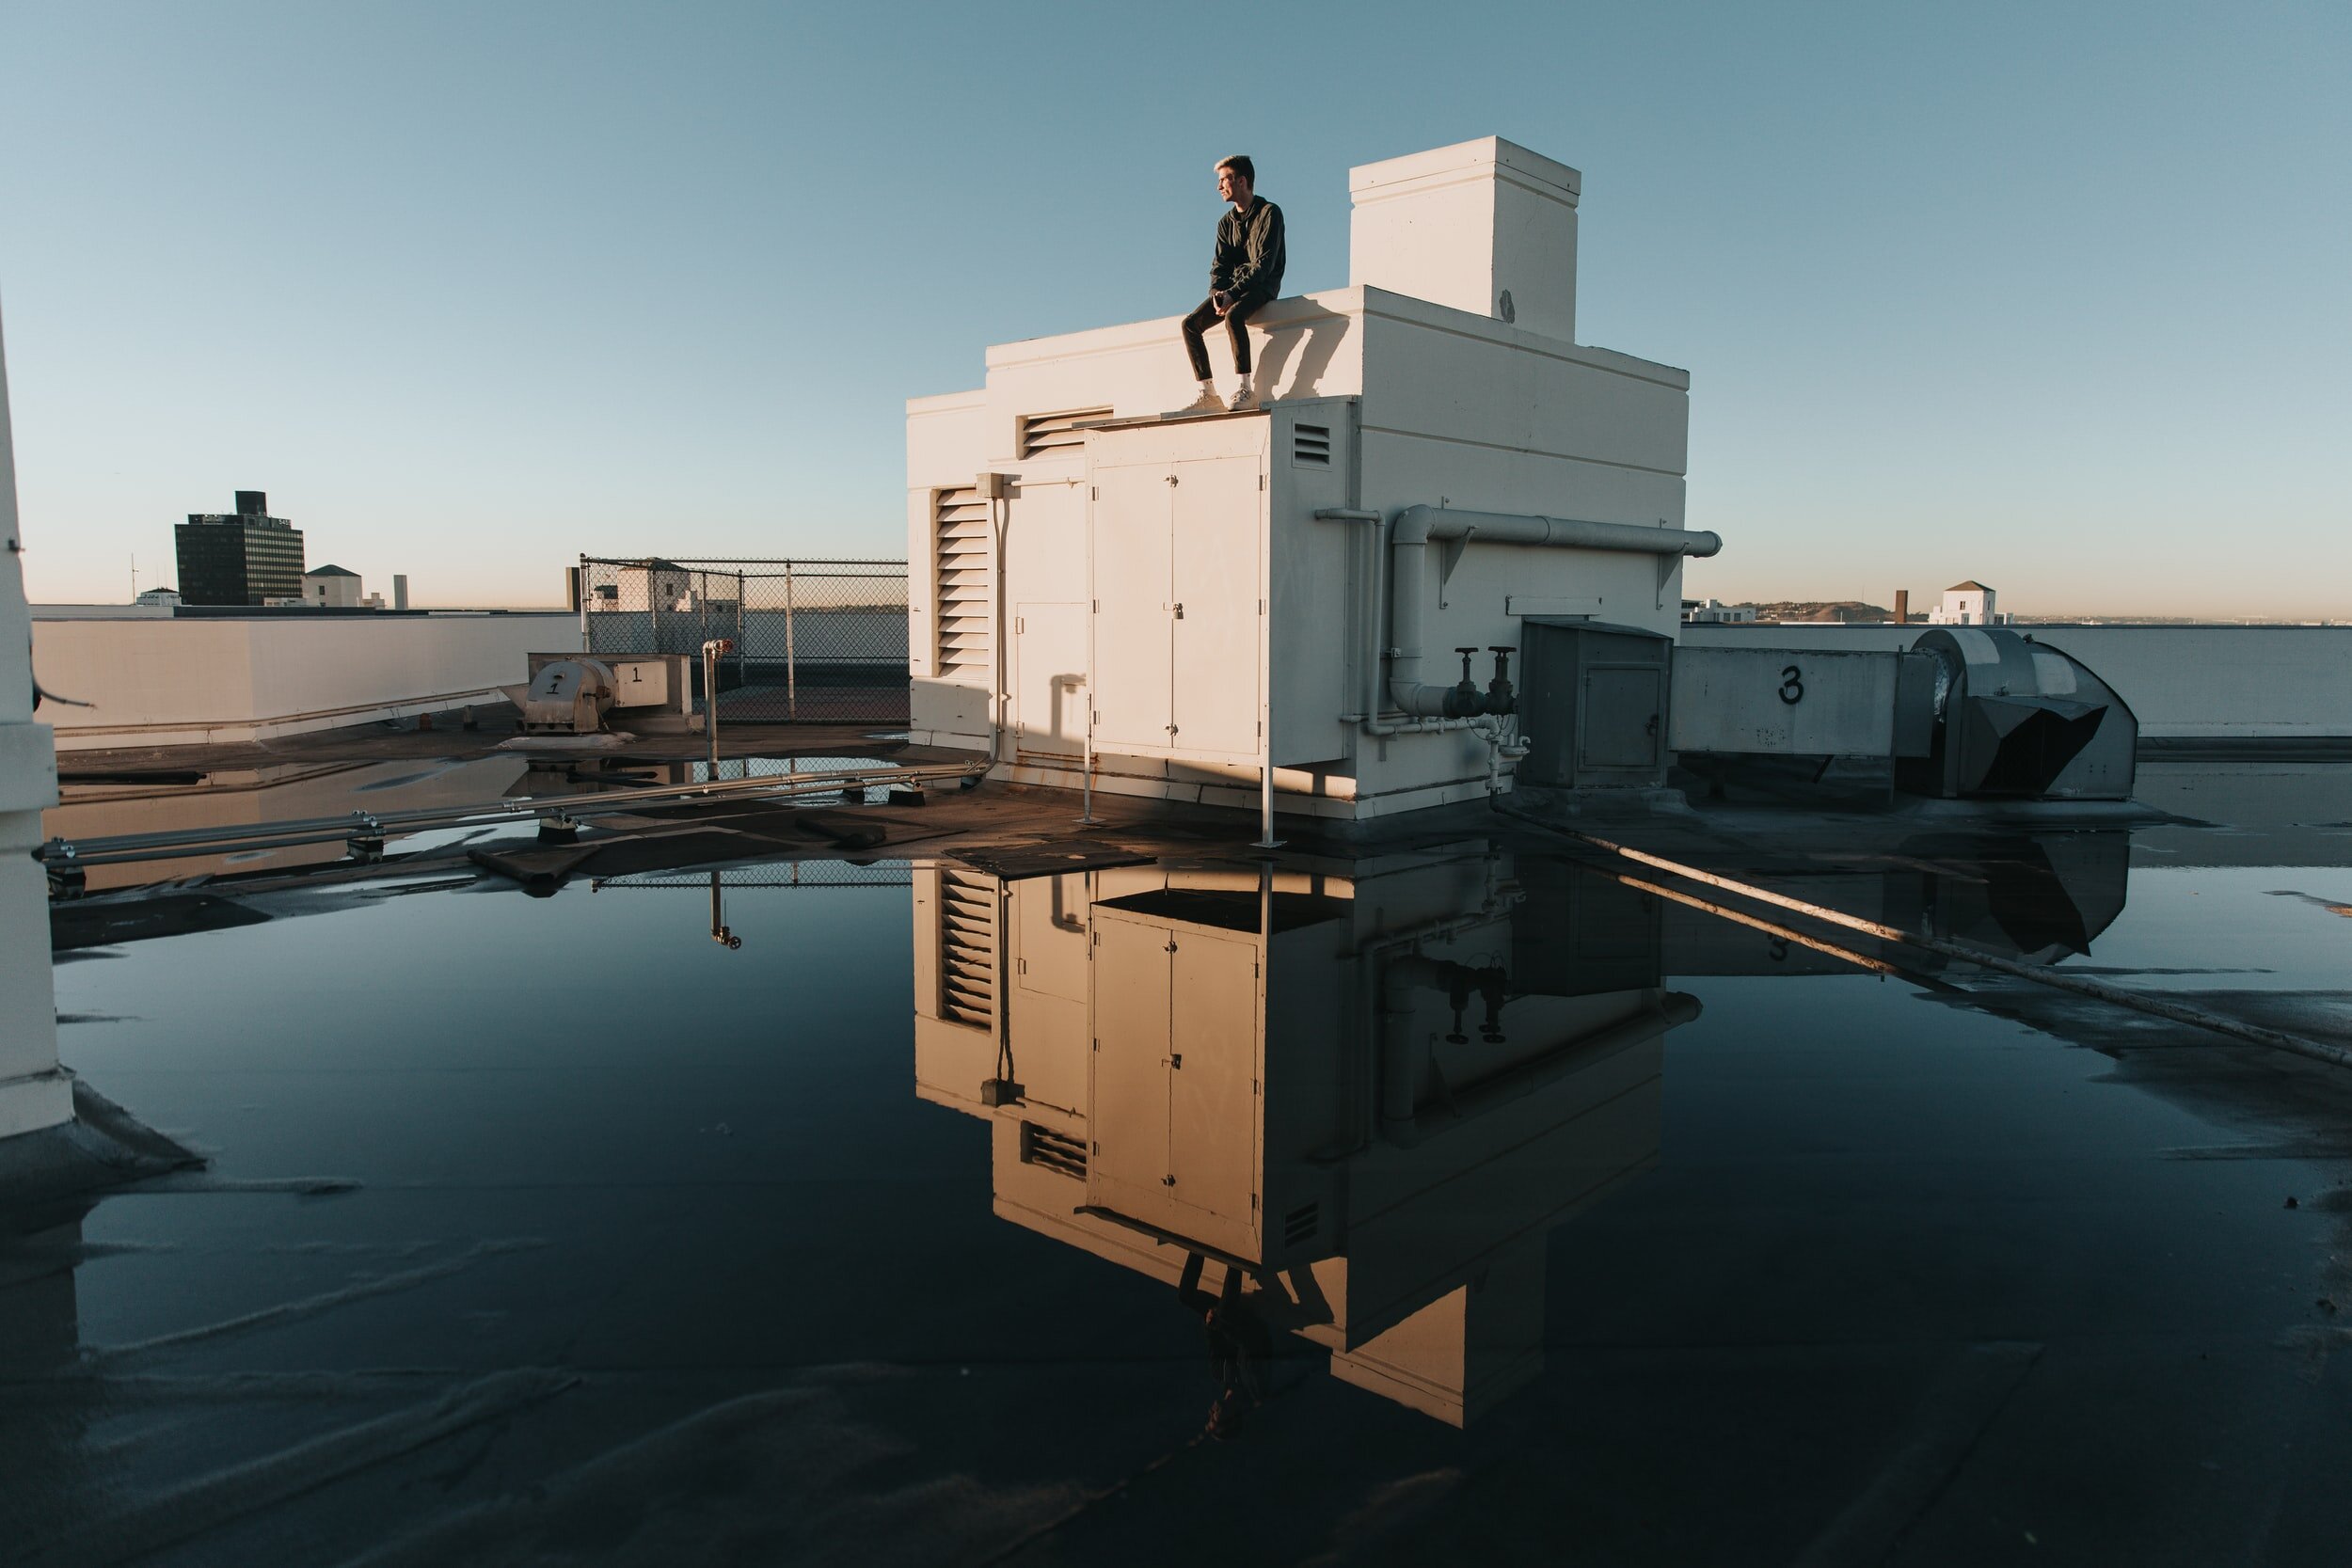 Water sitting on a roof is never good for a building. Colyer and Company can inspect your roof before you get into trouble.